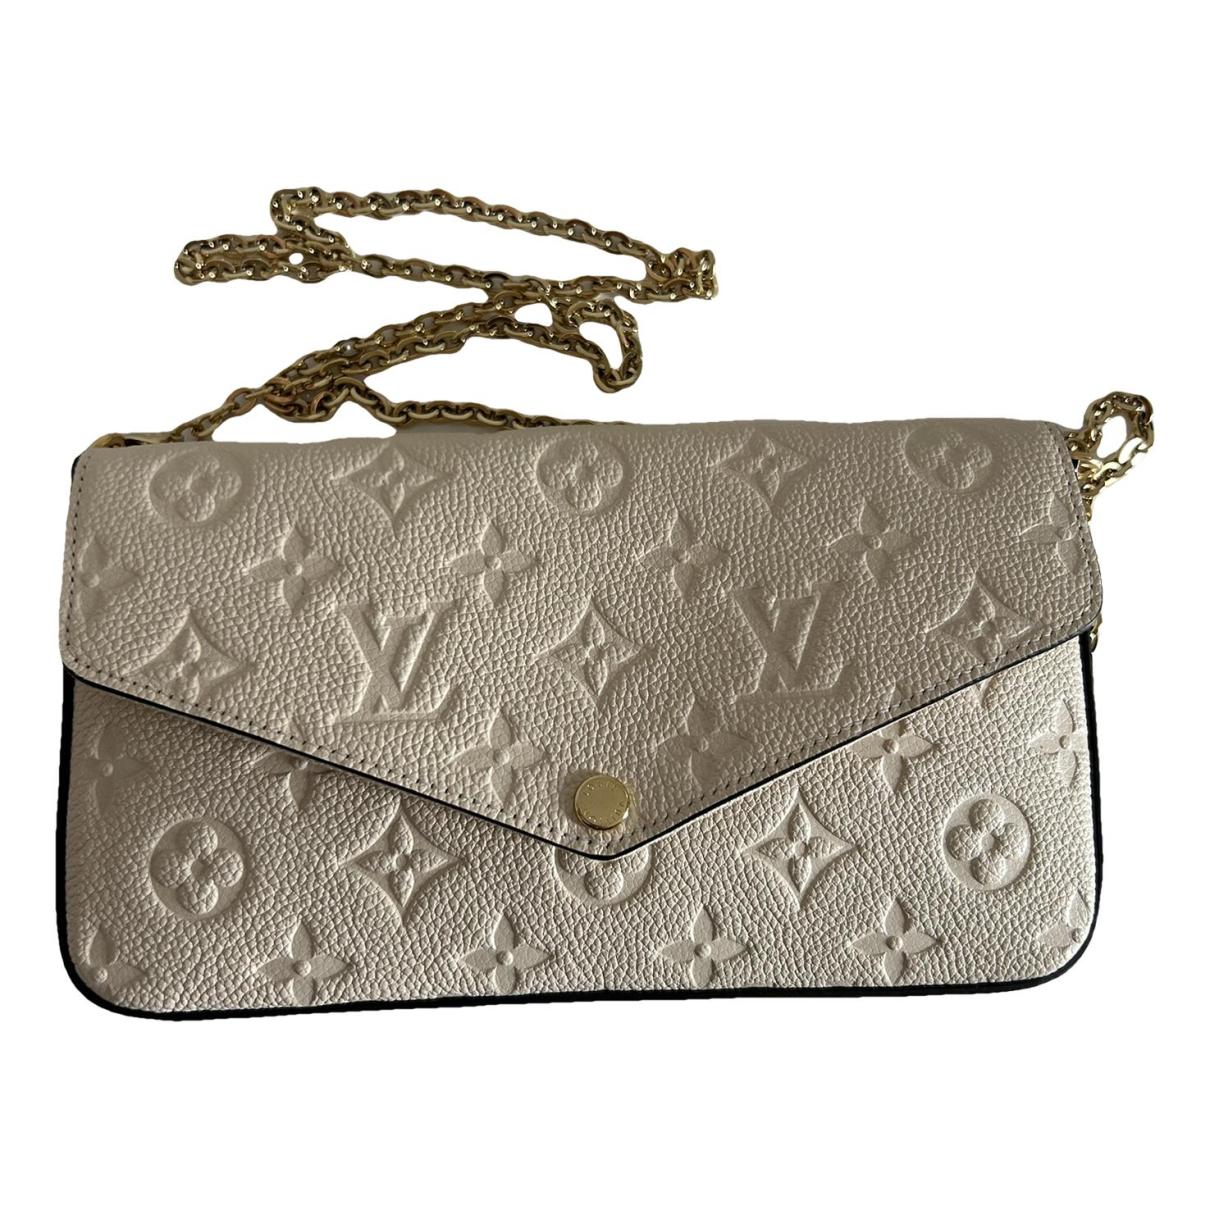 Félicie leather crossbody bag Louis Vuitton Grey in Leather - 22927134